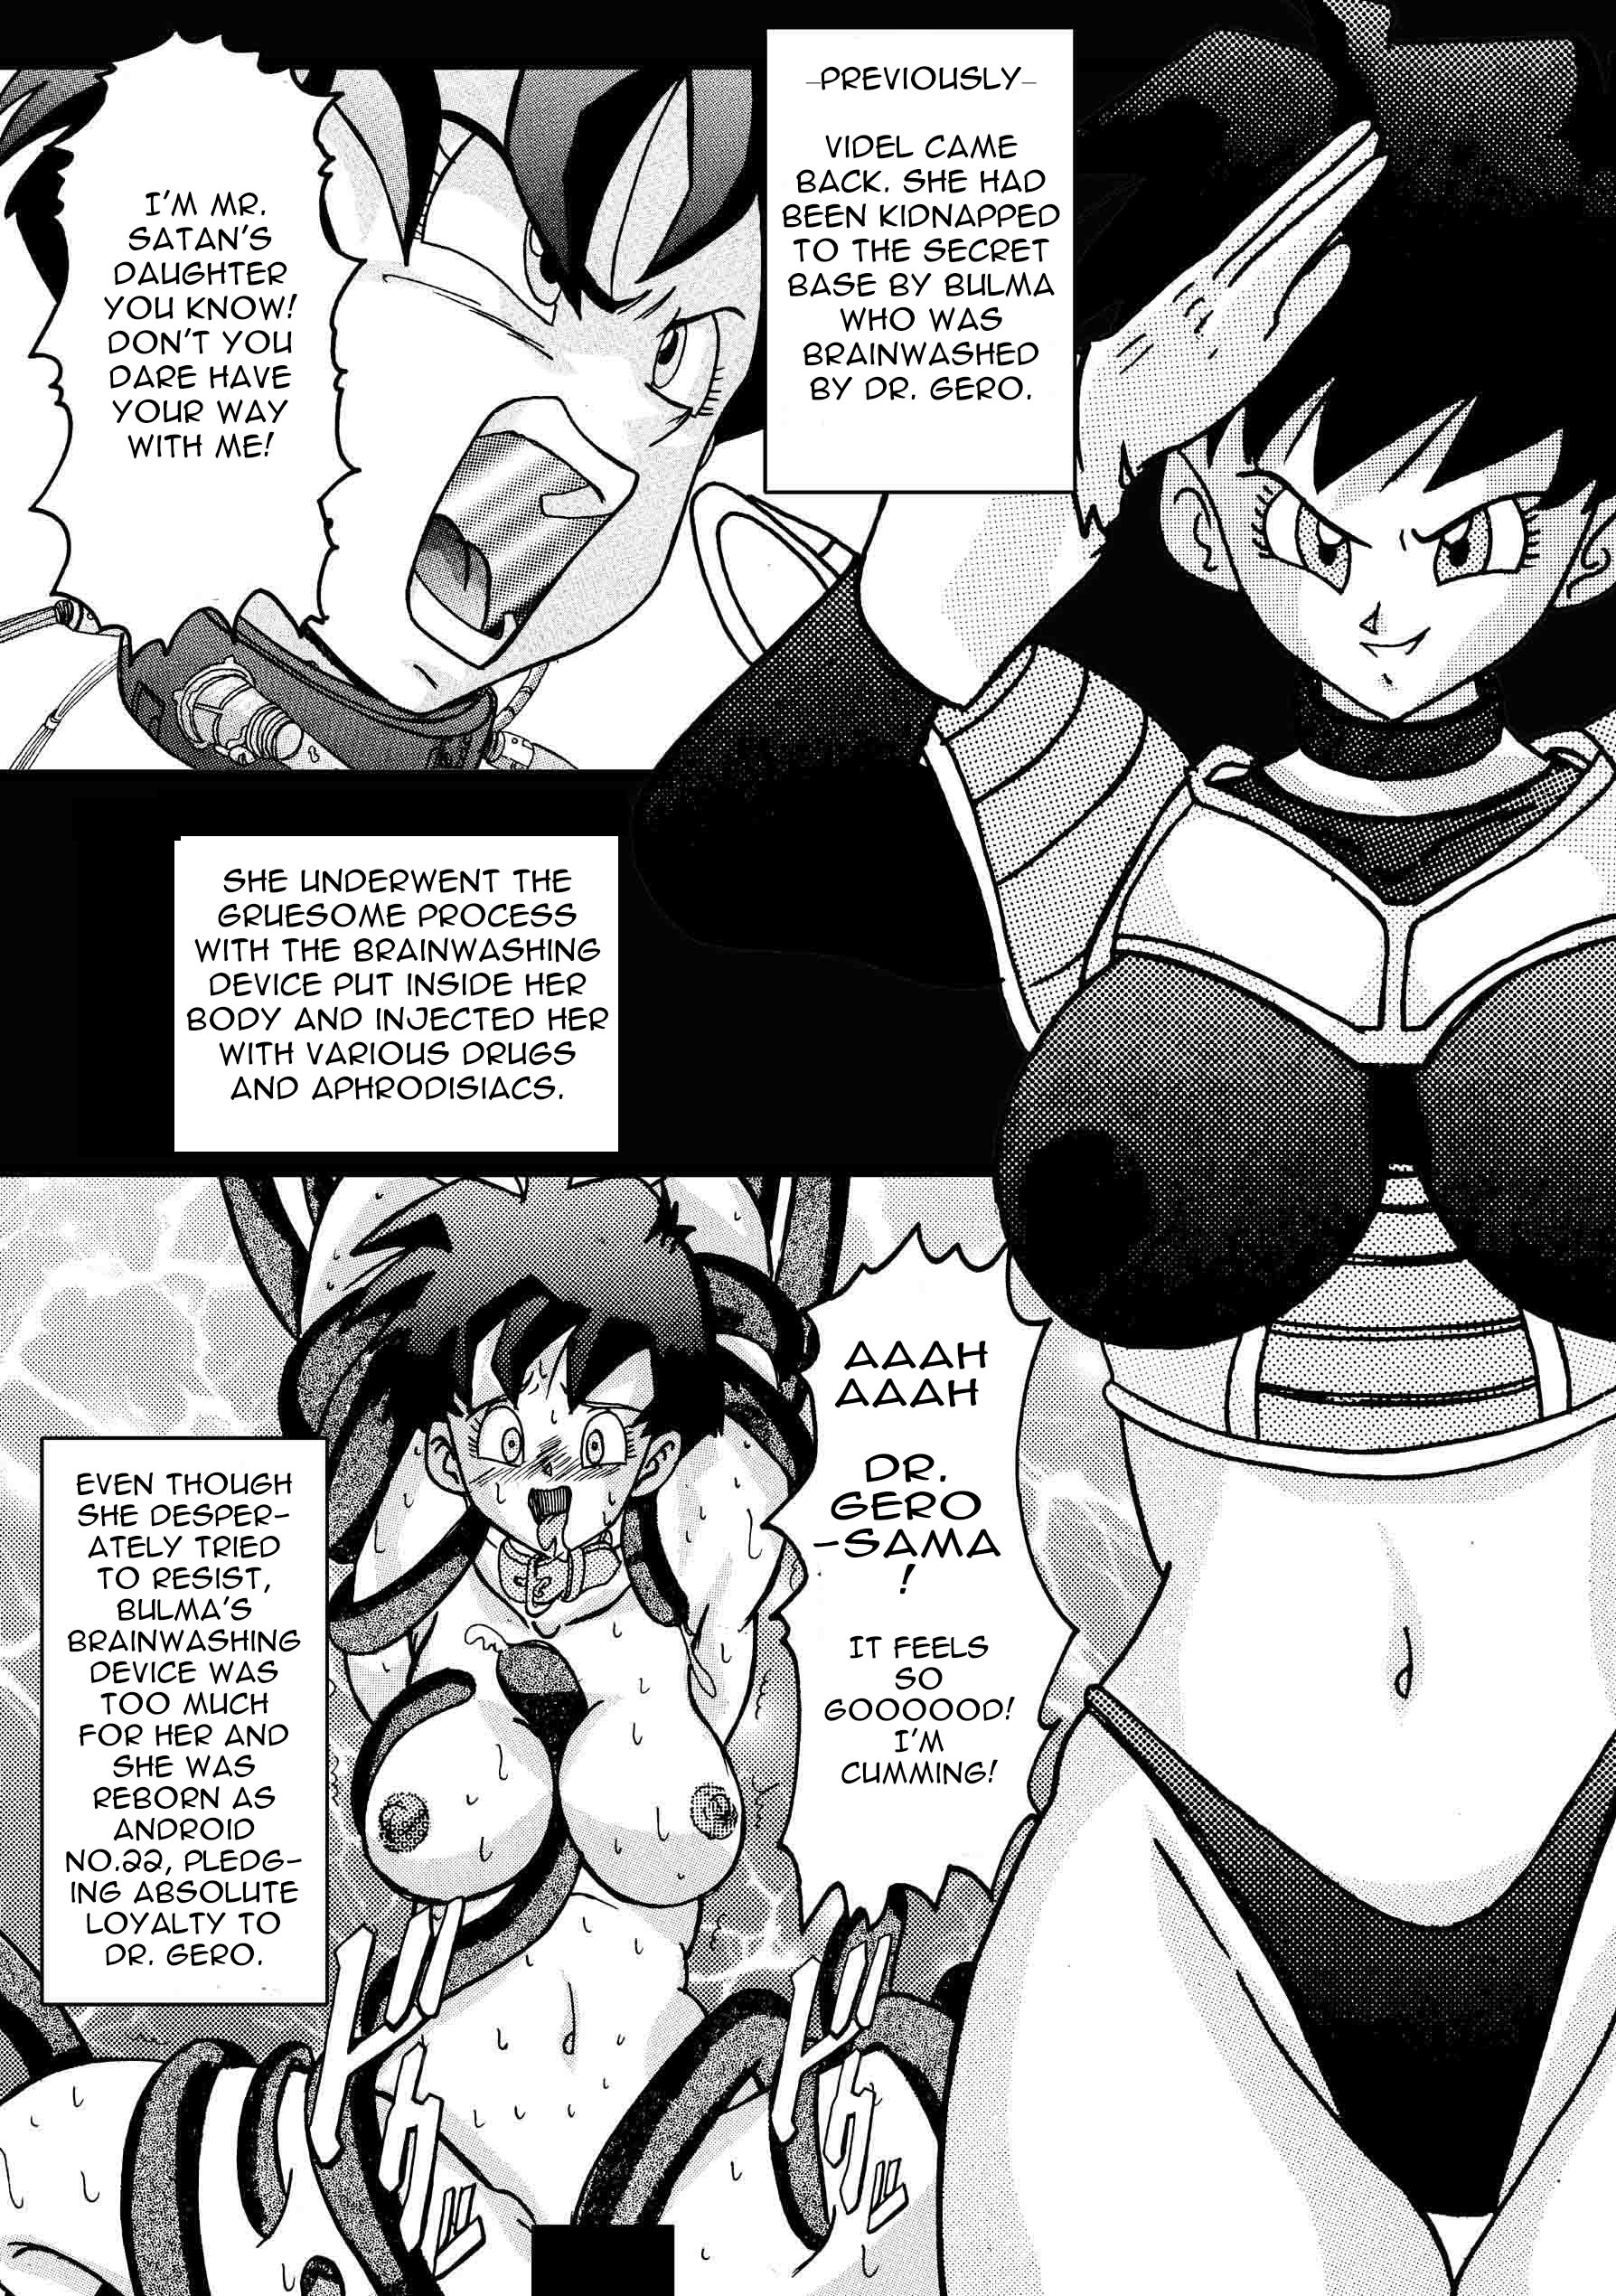 best of Mind controlled naked and bulma chichi